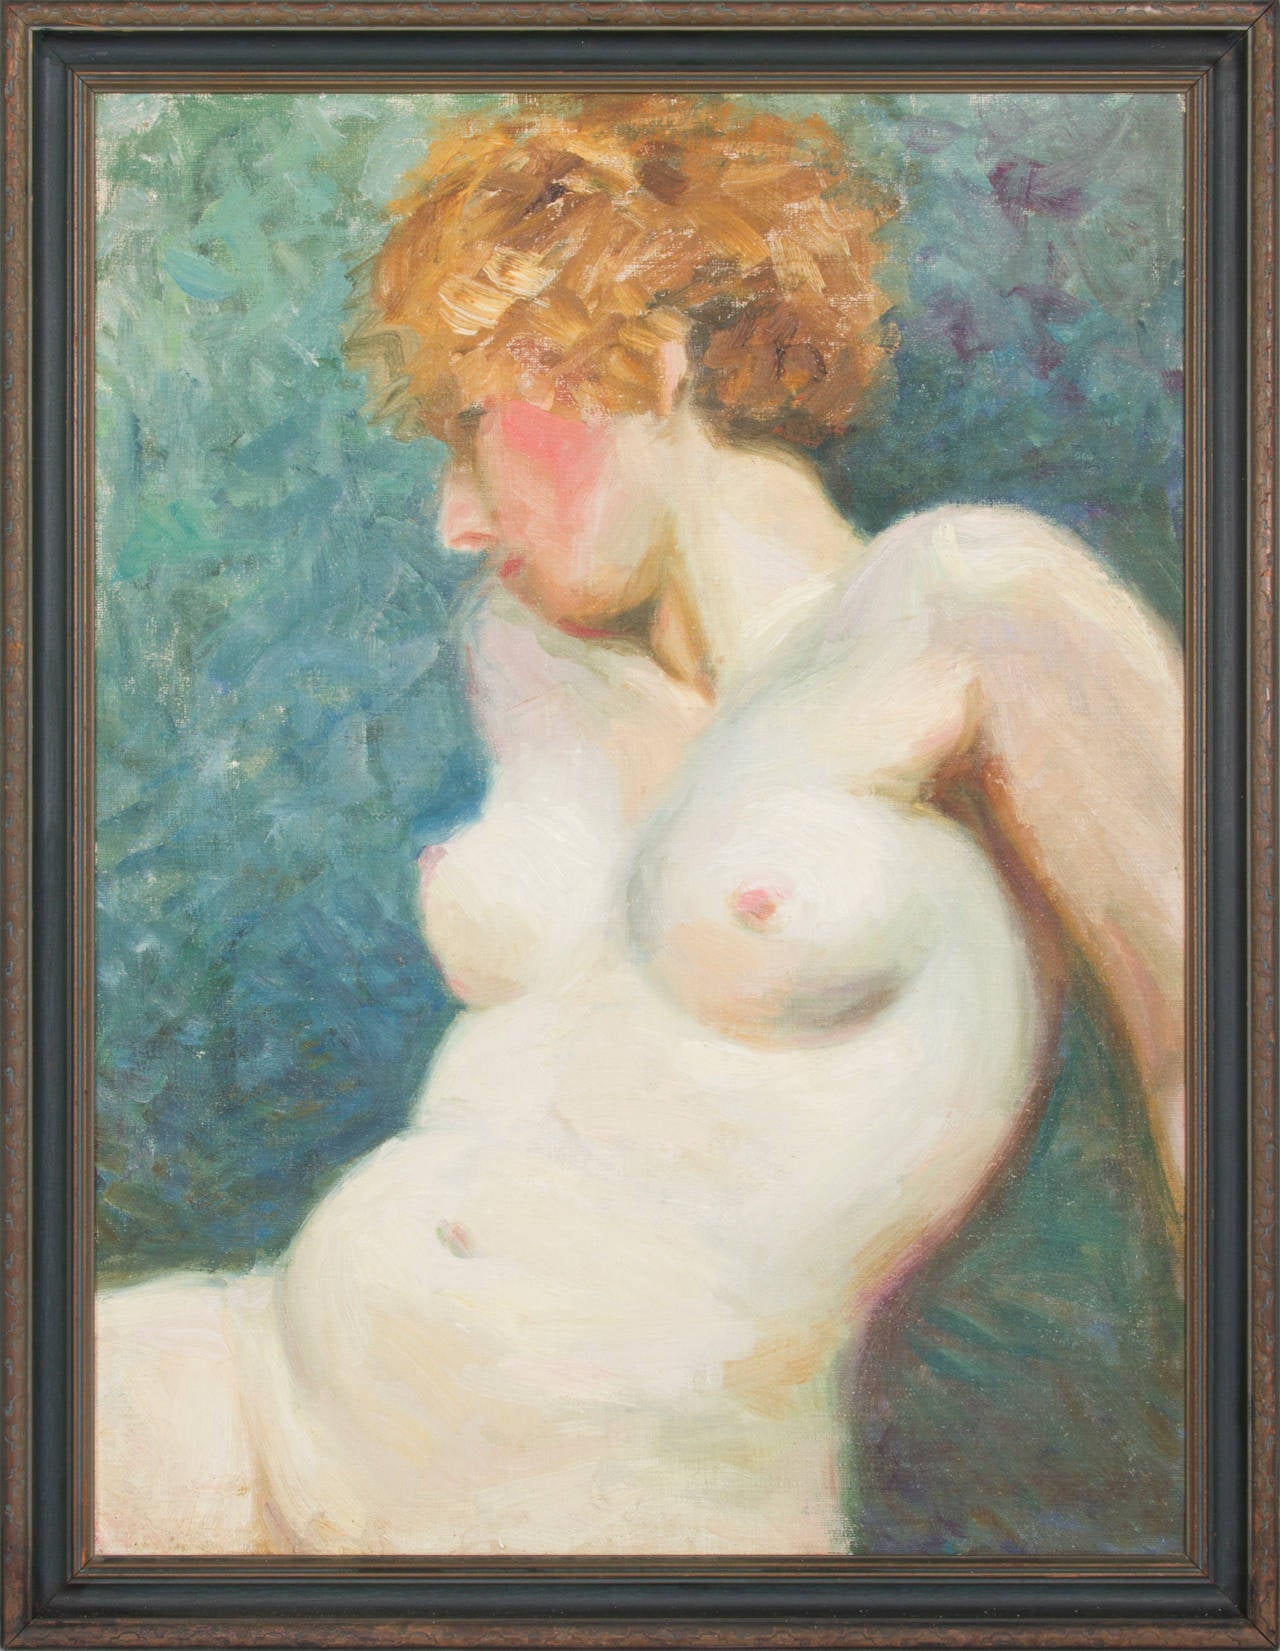 This is a nicely painted nude from the 1920s, in its original frame. The painting measures 18